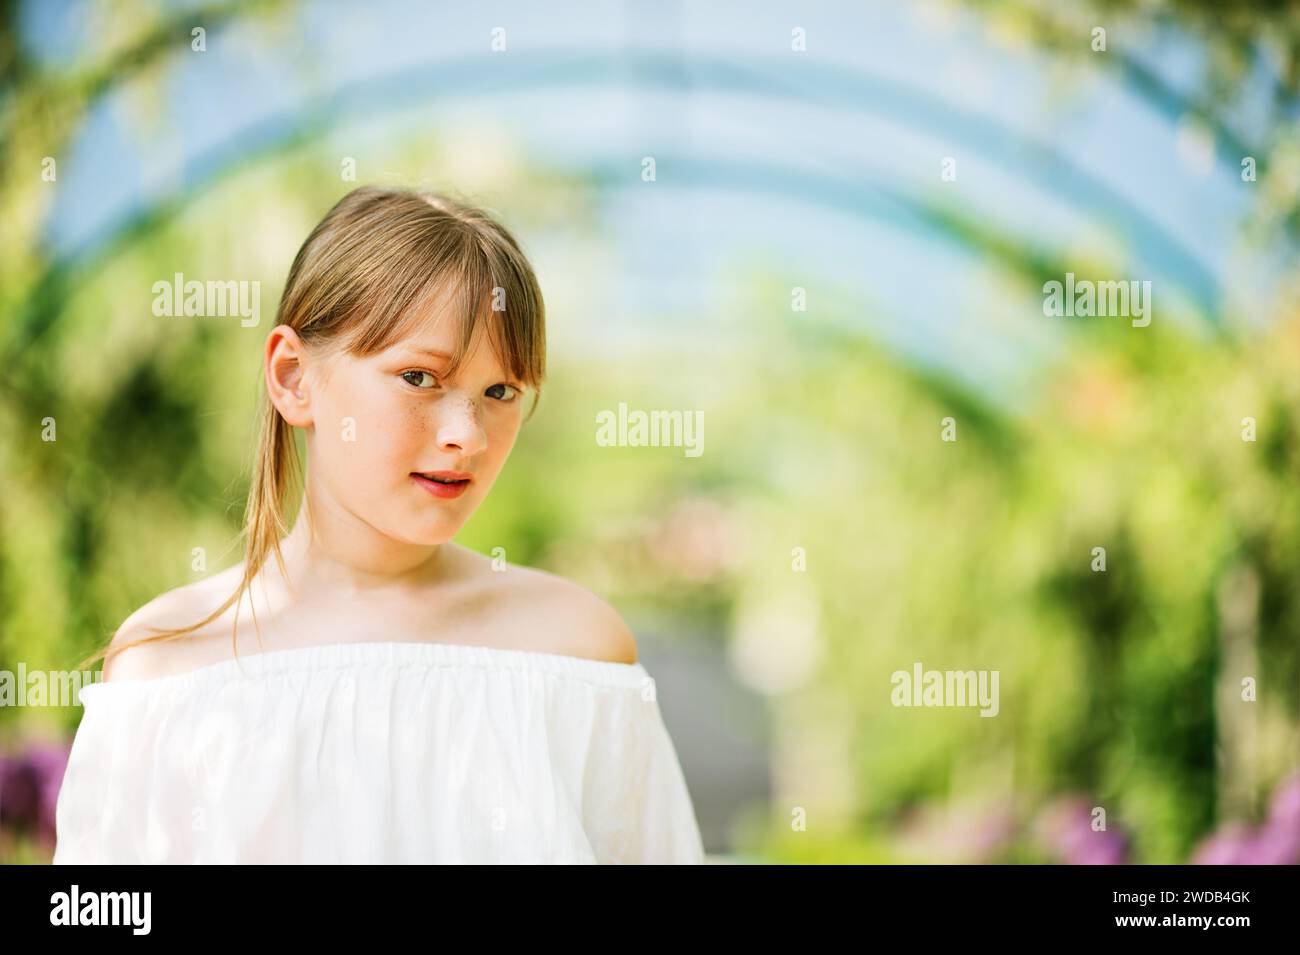 Outdoor close up portrait of a cute 9-10 year old little girl in a beautiful park with an arch Stock Photo